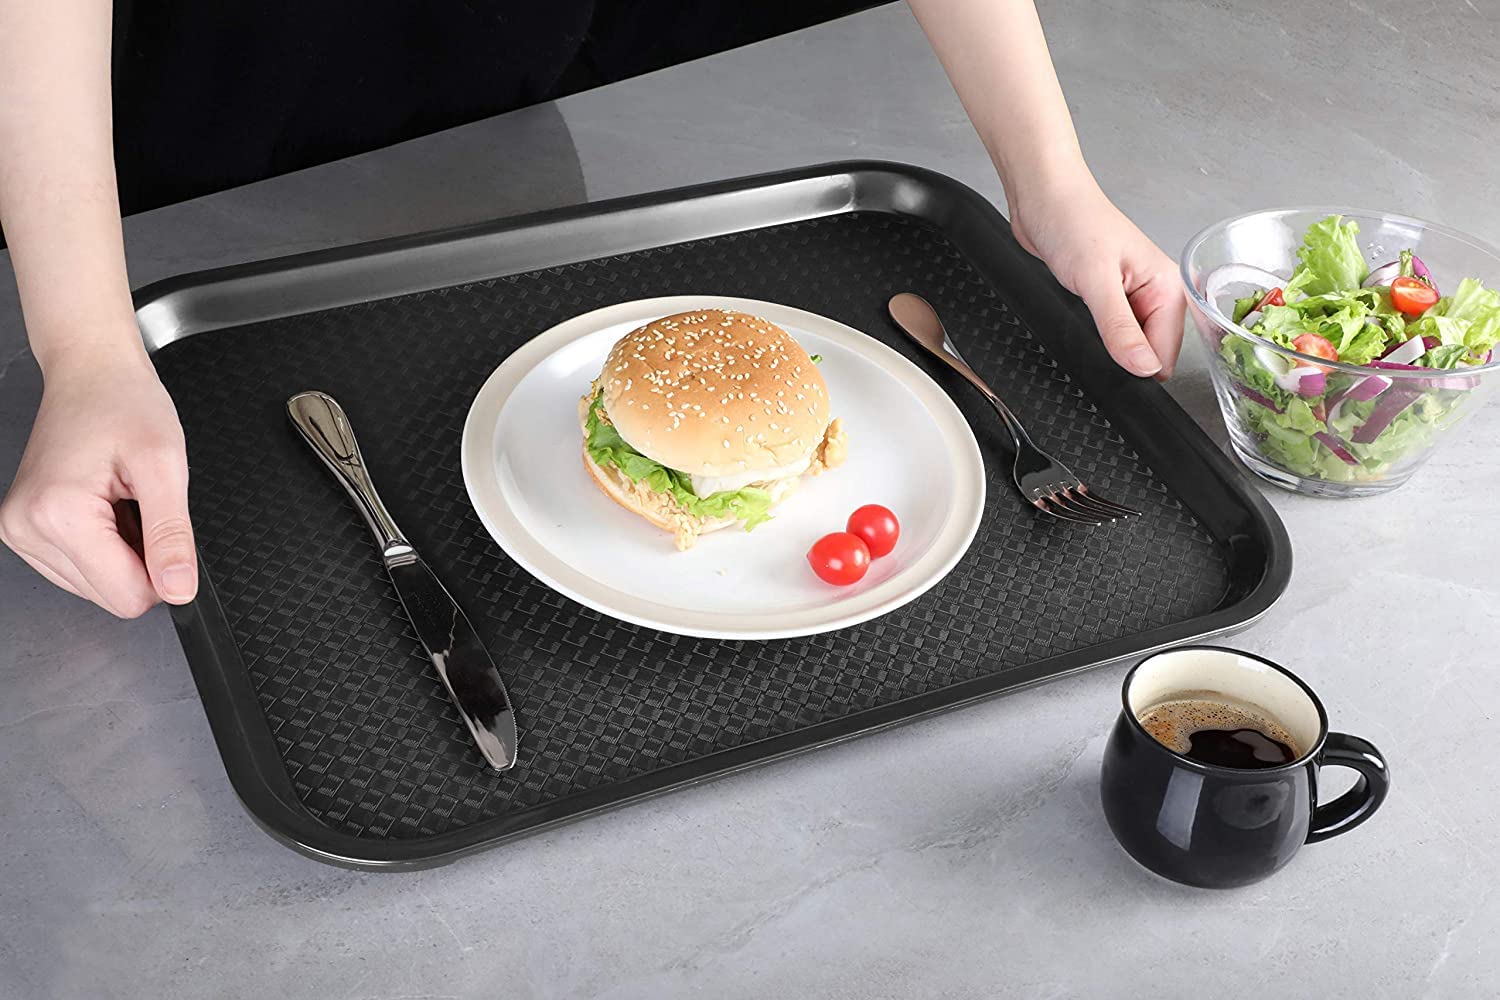 NJ Plastic Serving Platter Large Tray Unbreakable Snacks Tea Serving Tray Black Drink Breakfast Tea Dinner Coffee Salad Food for Dinning Table Home Kitchen (16 X 12 Inches) : 3 Pcs.